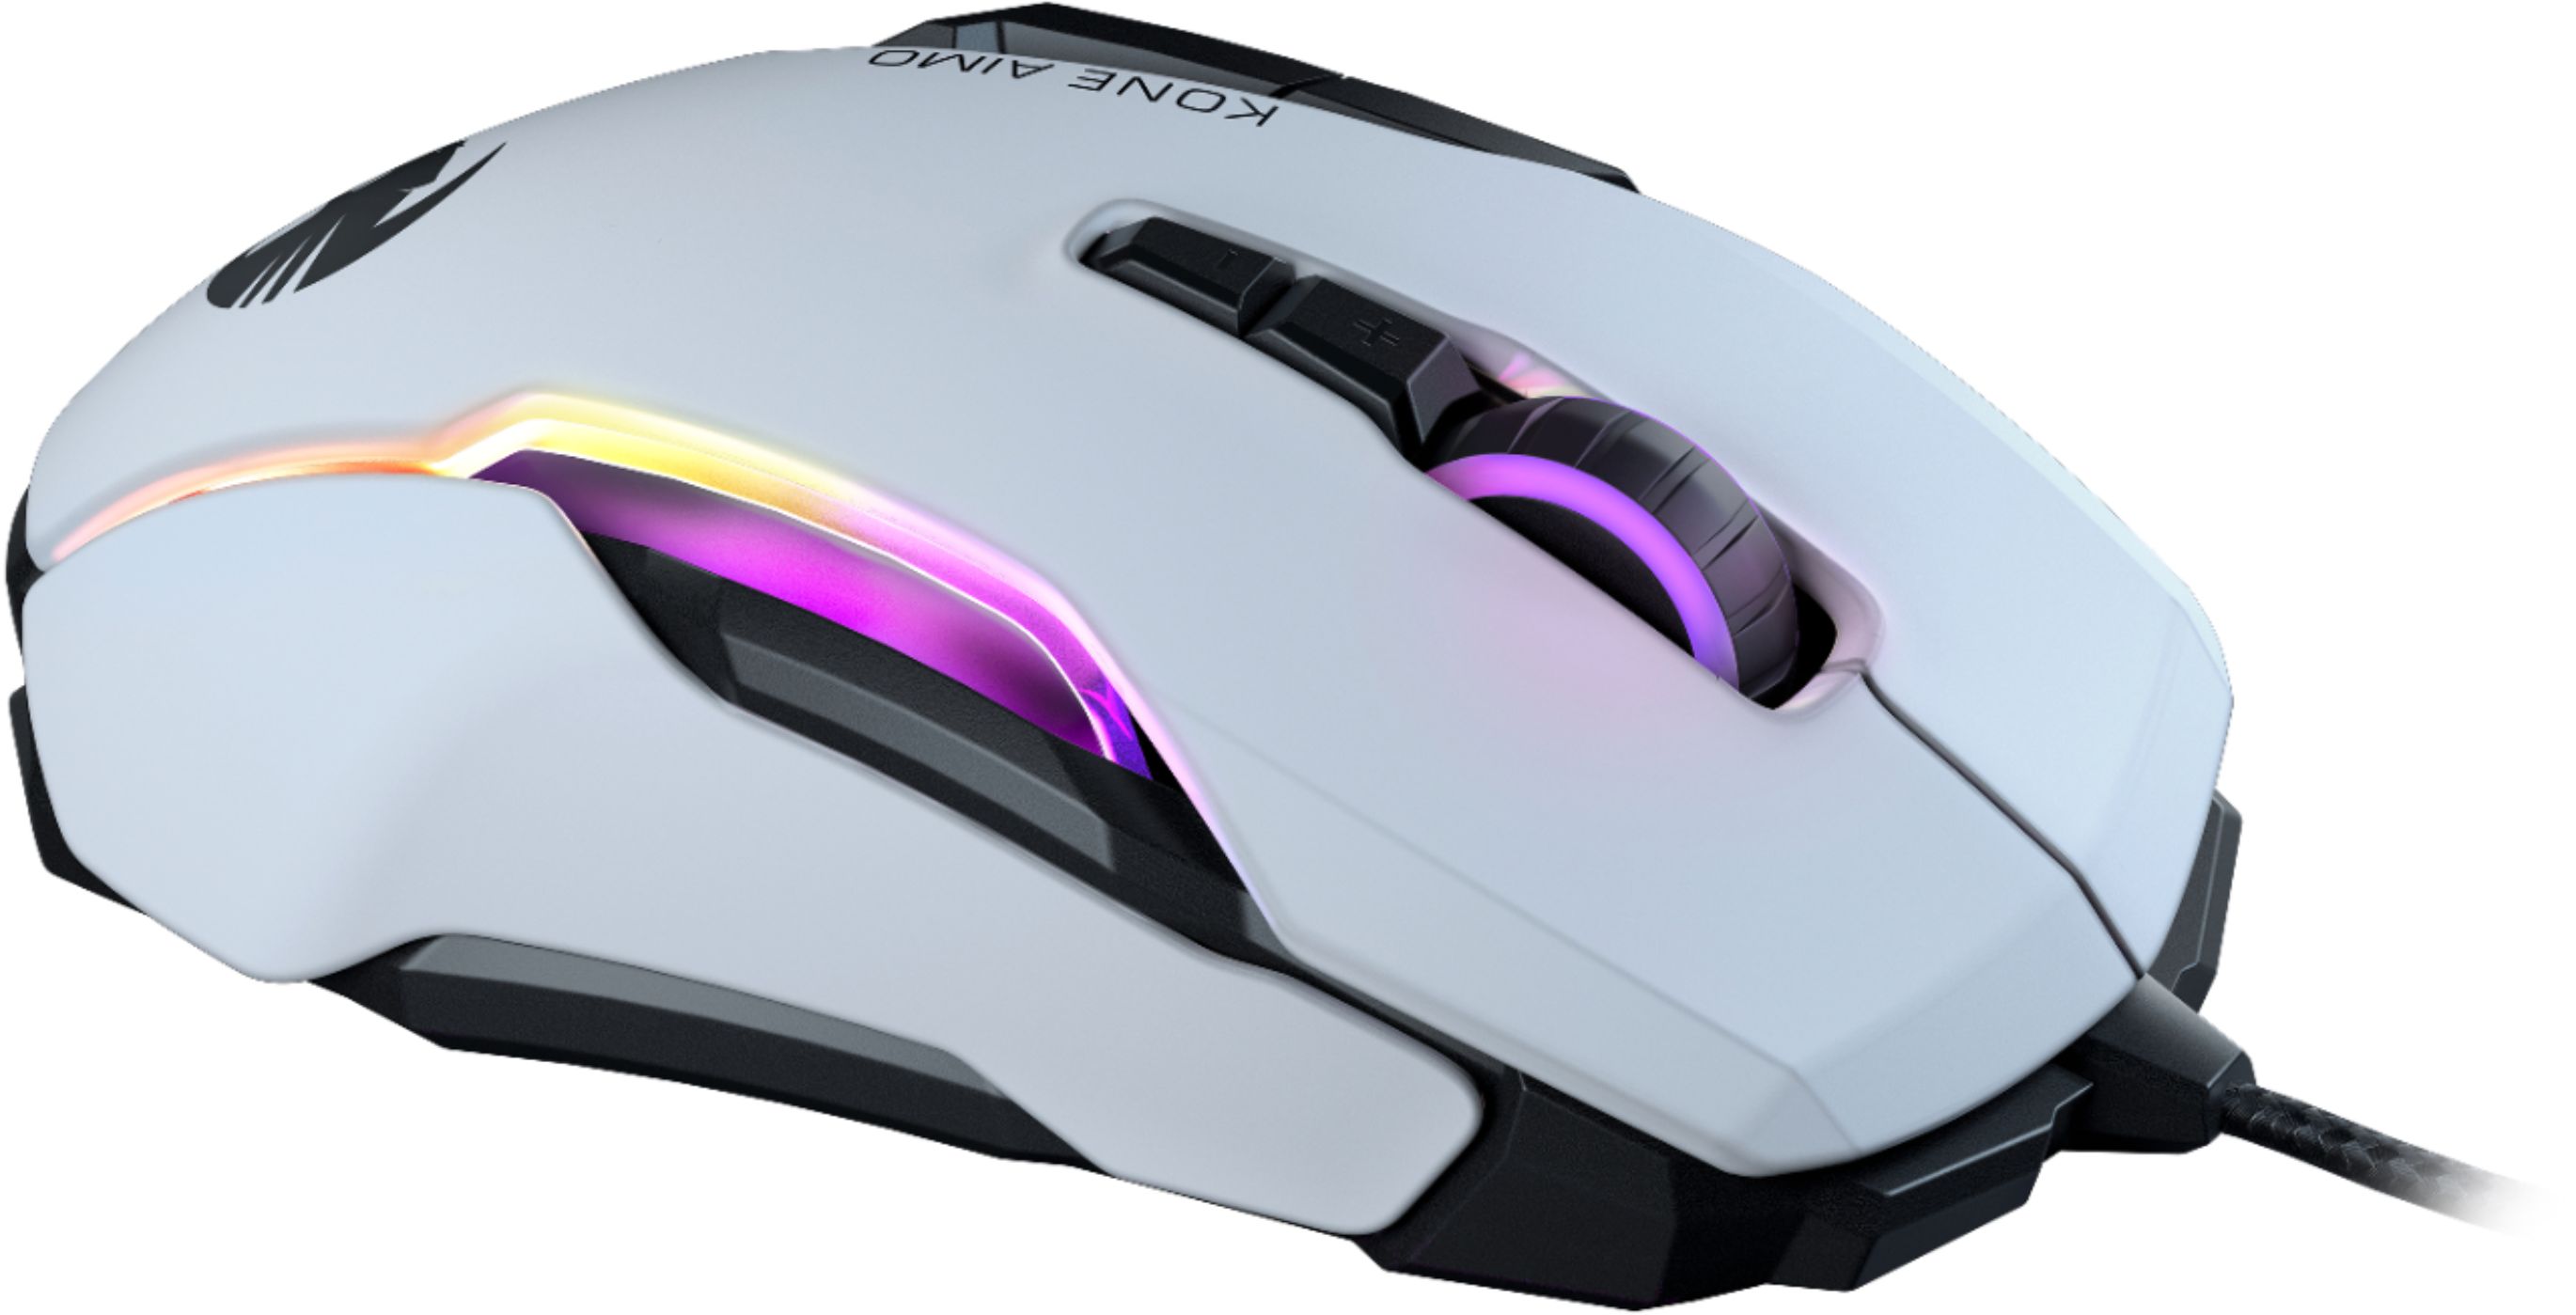 Kone Aimo Software - Roccat Kone Aimo Rgb Gaming Mouse Review Play3r